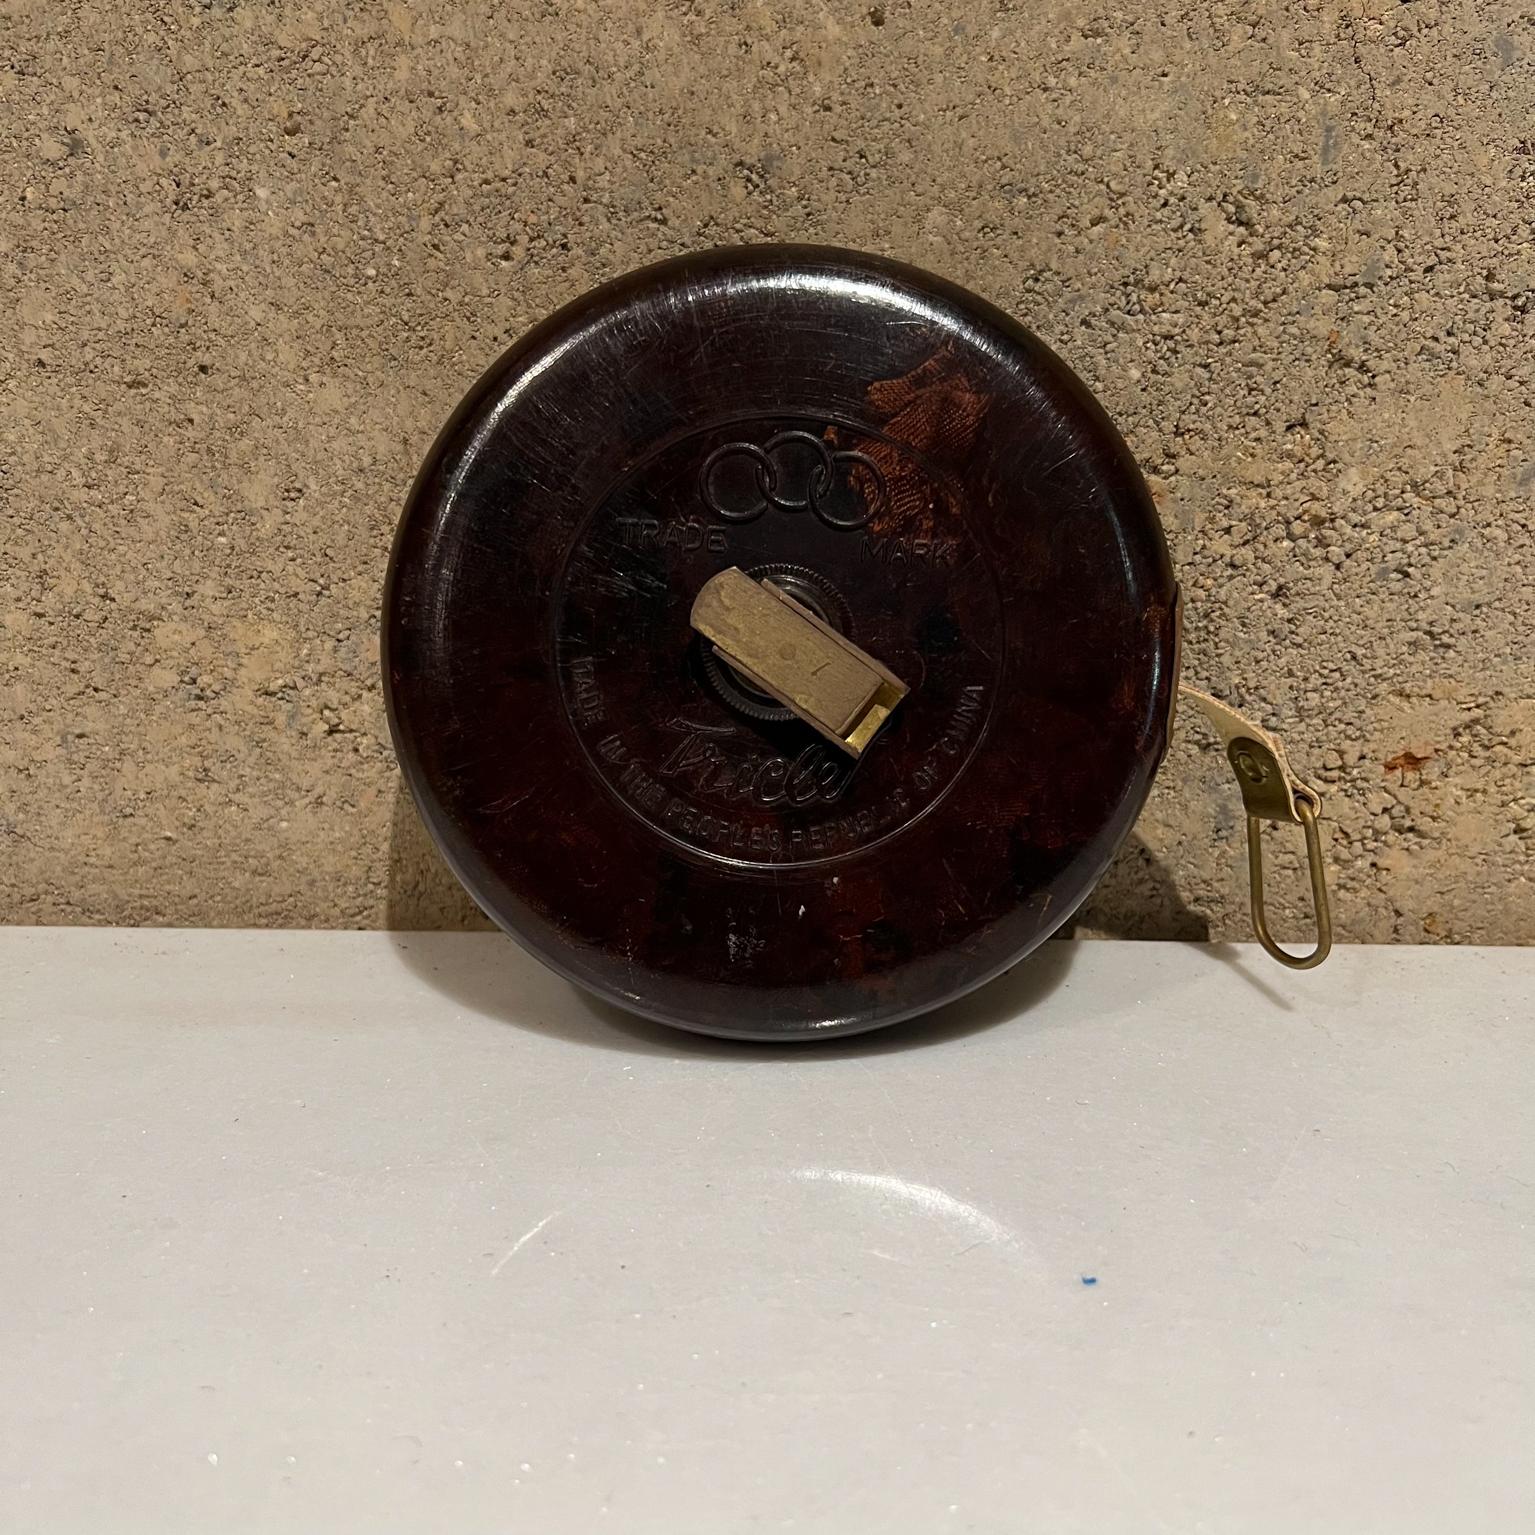 Vintage Tricle Bakelite Olympic tape Measure Peoples Republic of China
Wonderful vintage tape measure has a cover made from dappled rich dark colored bake-lite with gilt brass fittings and a cloth tape.
Made in the Peoples Republic of China
5.25